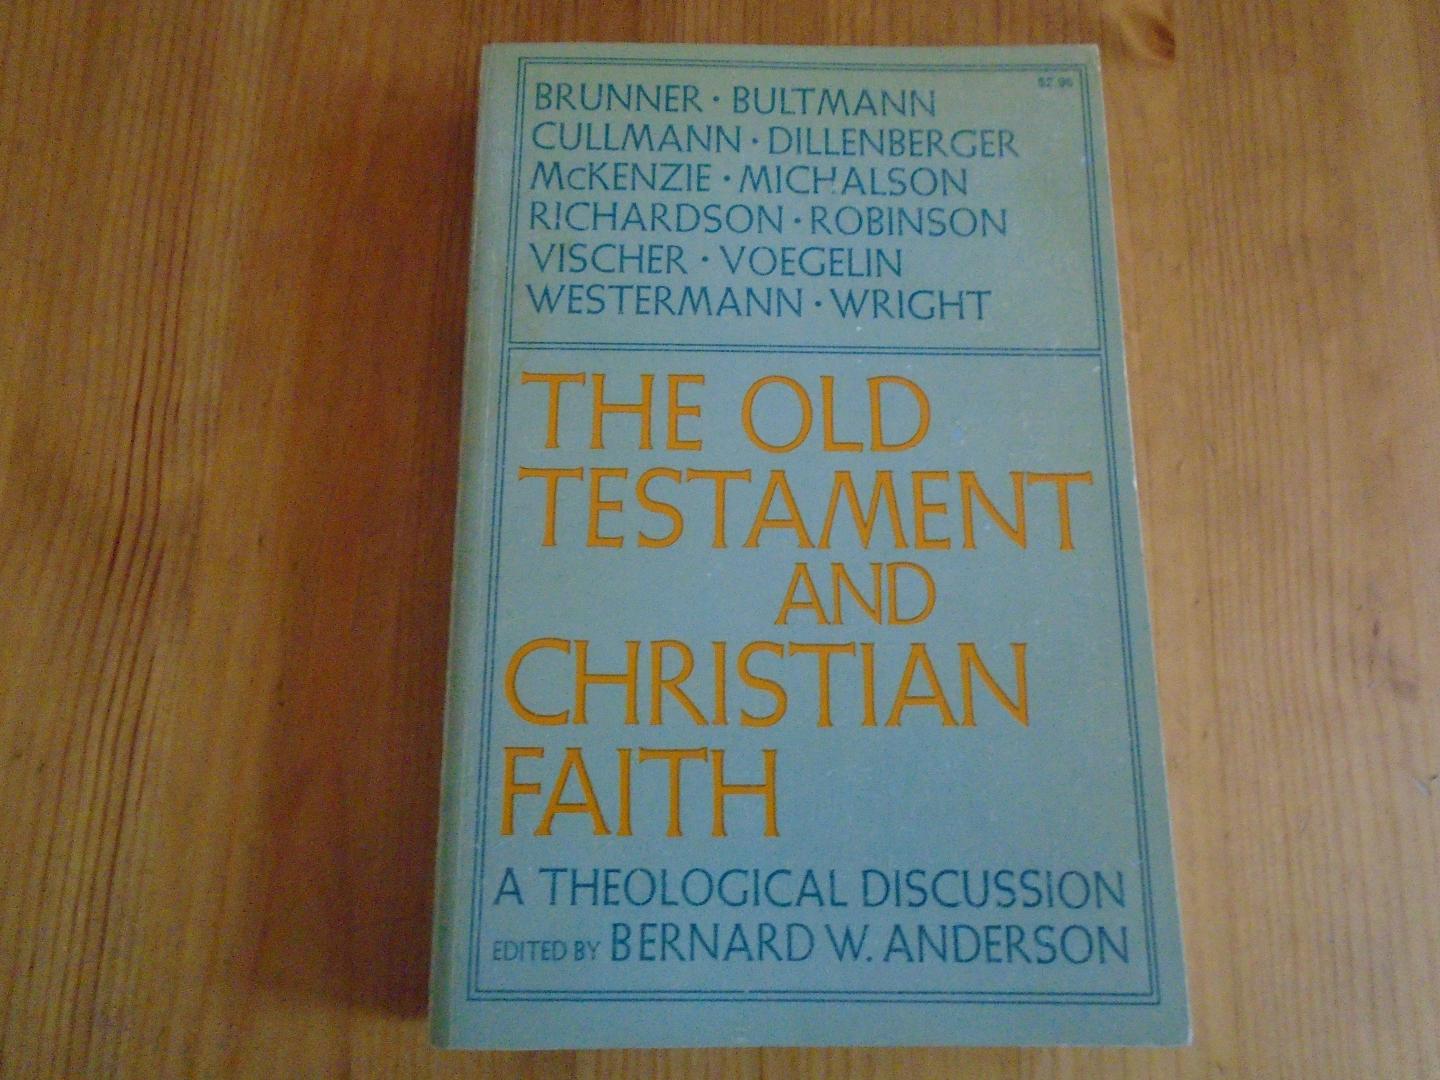 Anderson, Bernard W. - The Old Testament and Christian Faith. A Theological Discussion